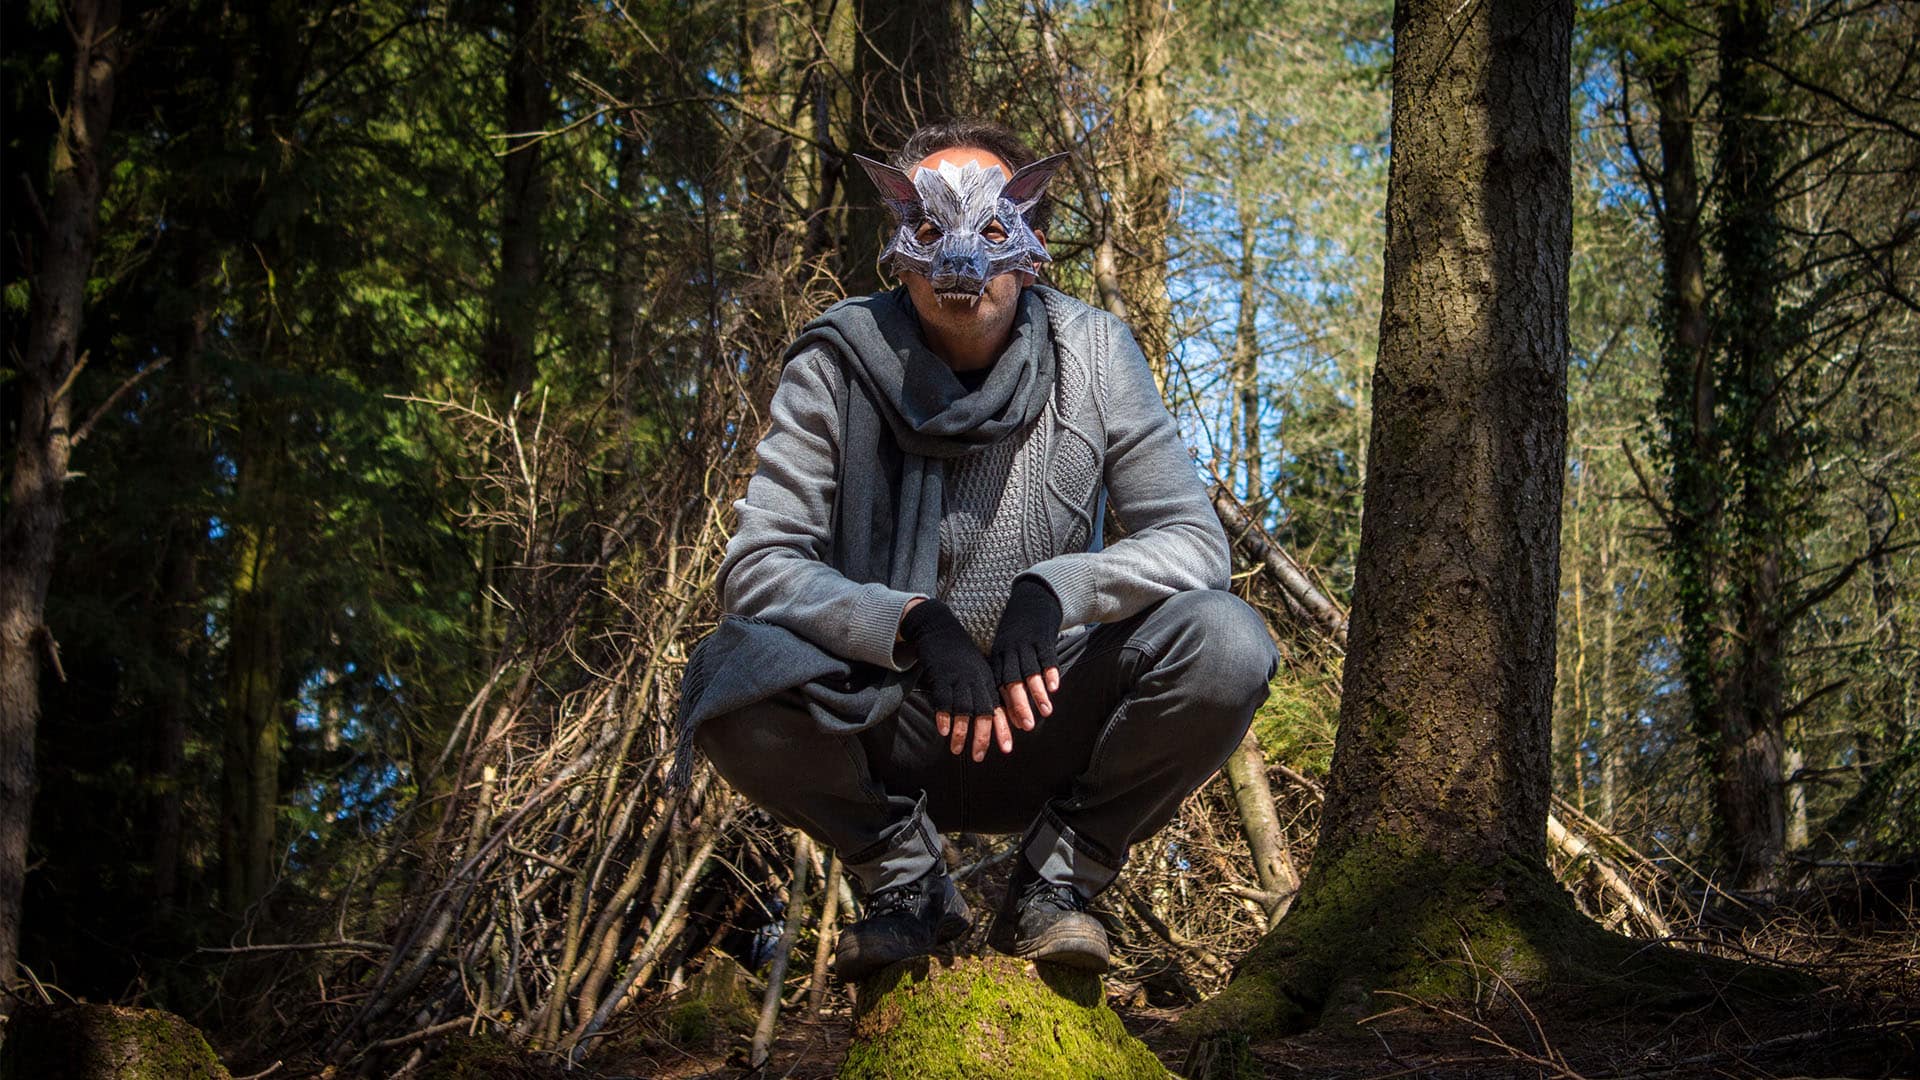 Little Red Riding Hood's Wolf is sitting crouched on a boulder in the woods,portrayed by an actor wearing grey clothing, a grey scarf, fingerless gloves and a very intricate and geometric wolf's mask